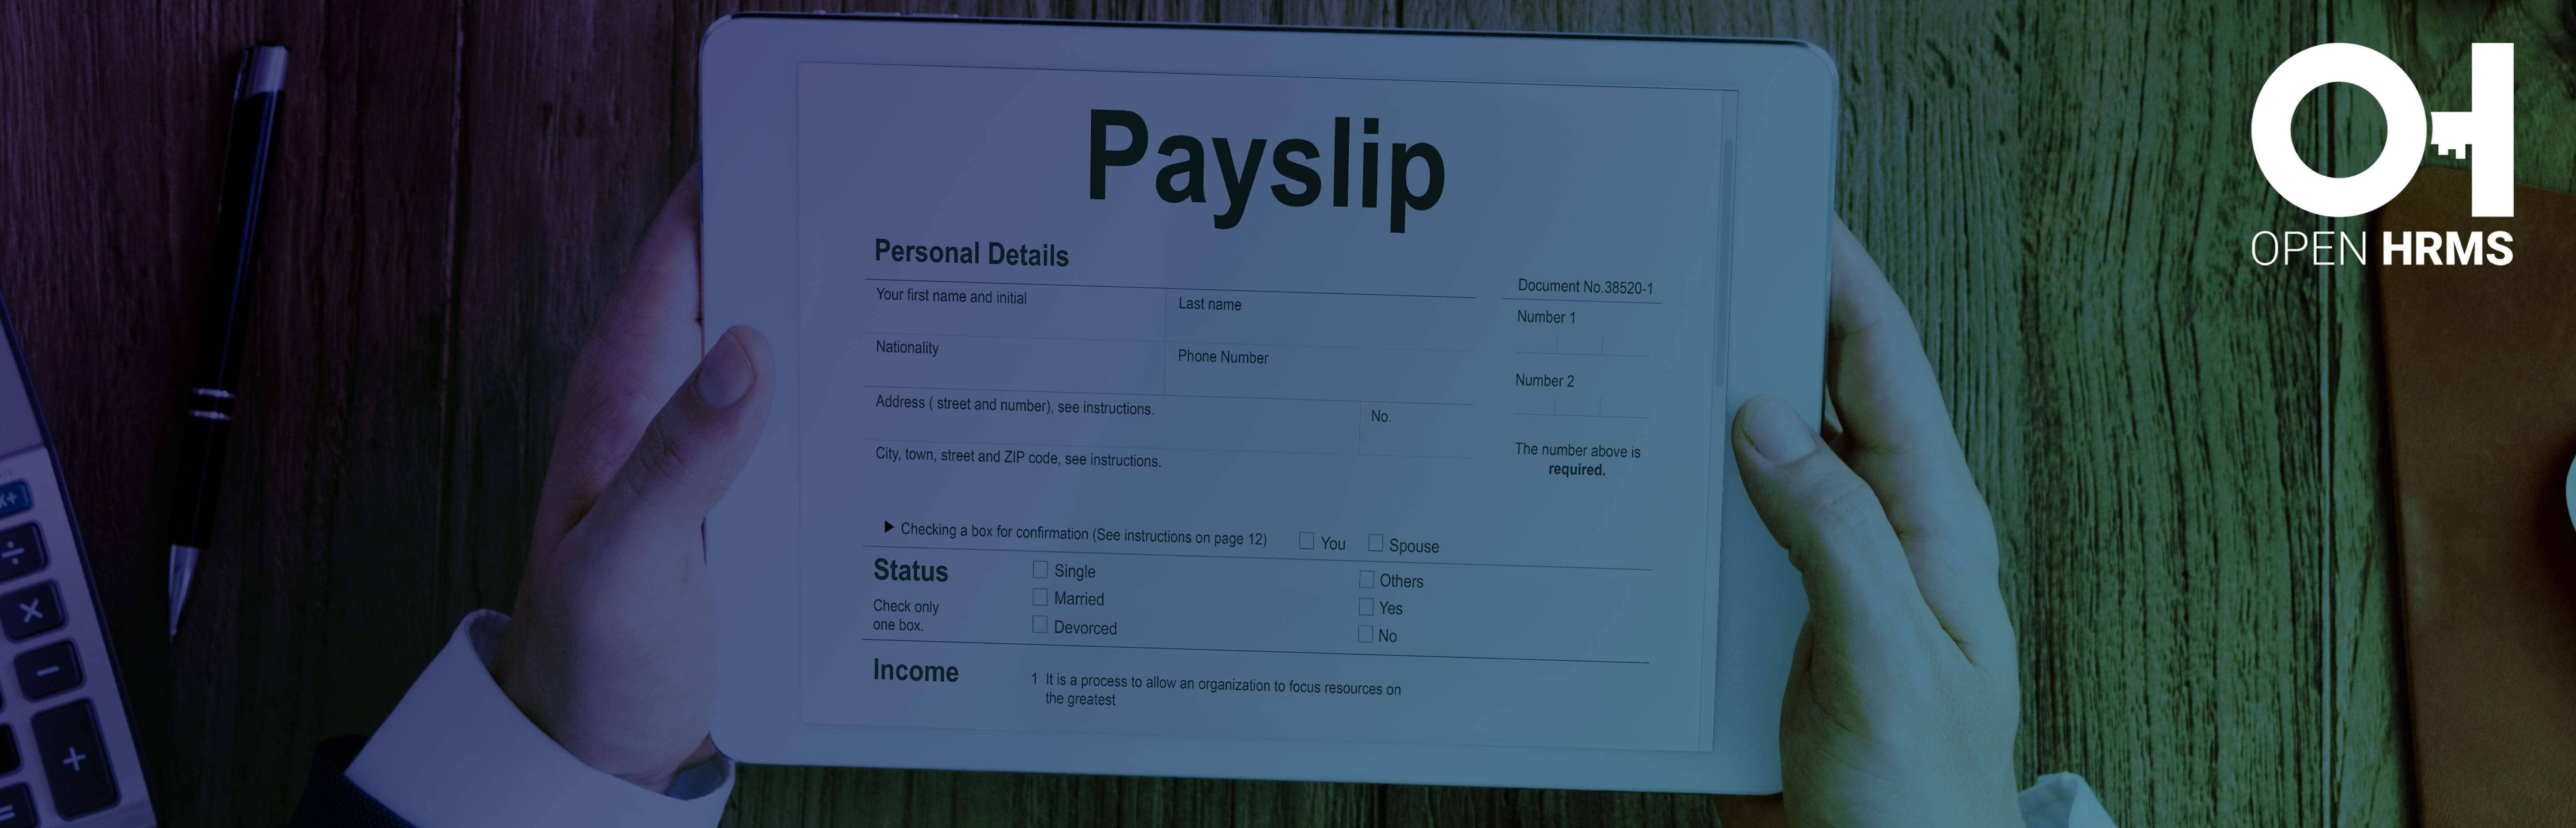 employee-payslips-and-payslips-batches-in-the-openhrms-payroll.jpg